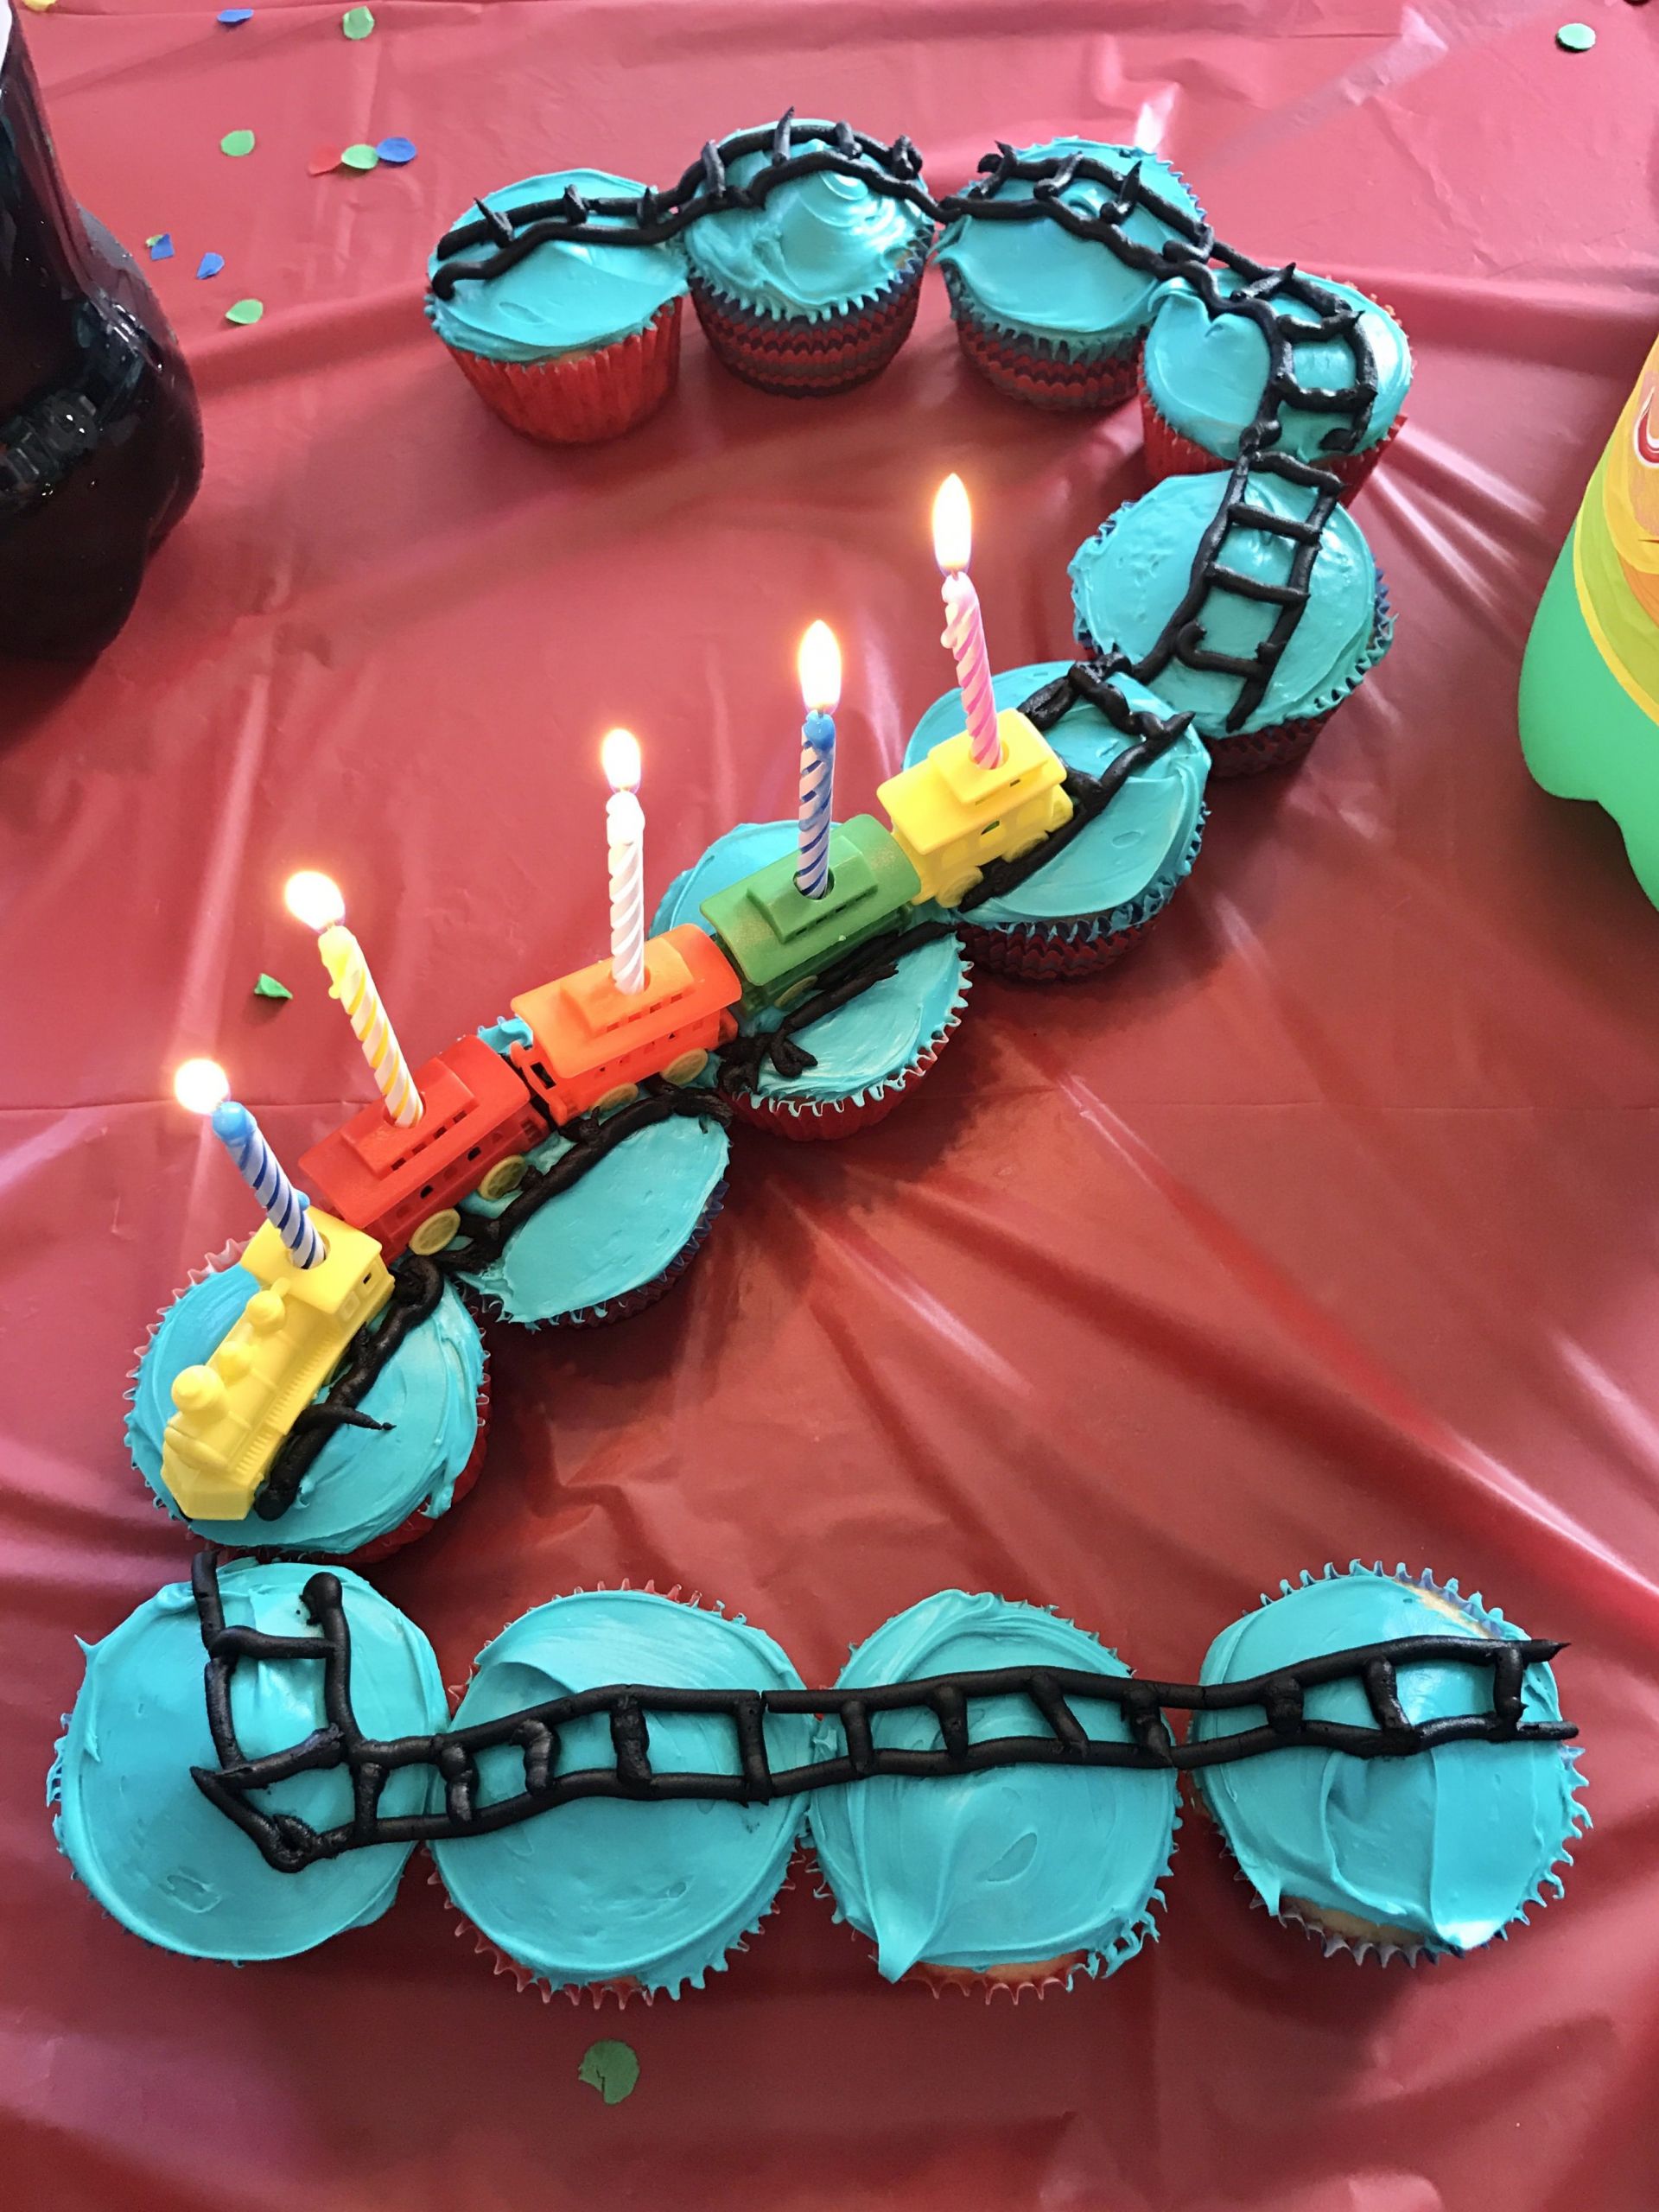 2 Year Old Boy Birthday Party Ideas Summer
 Train theme birthday party cupcakes for a two year old